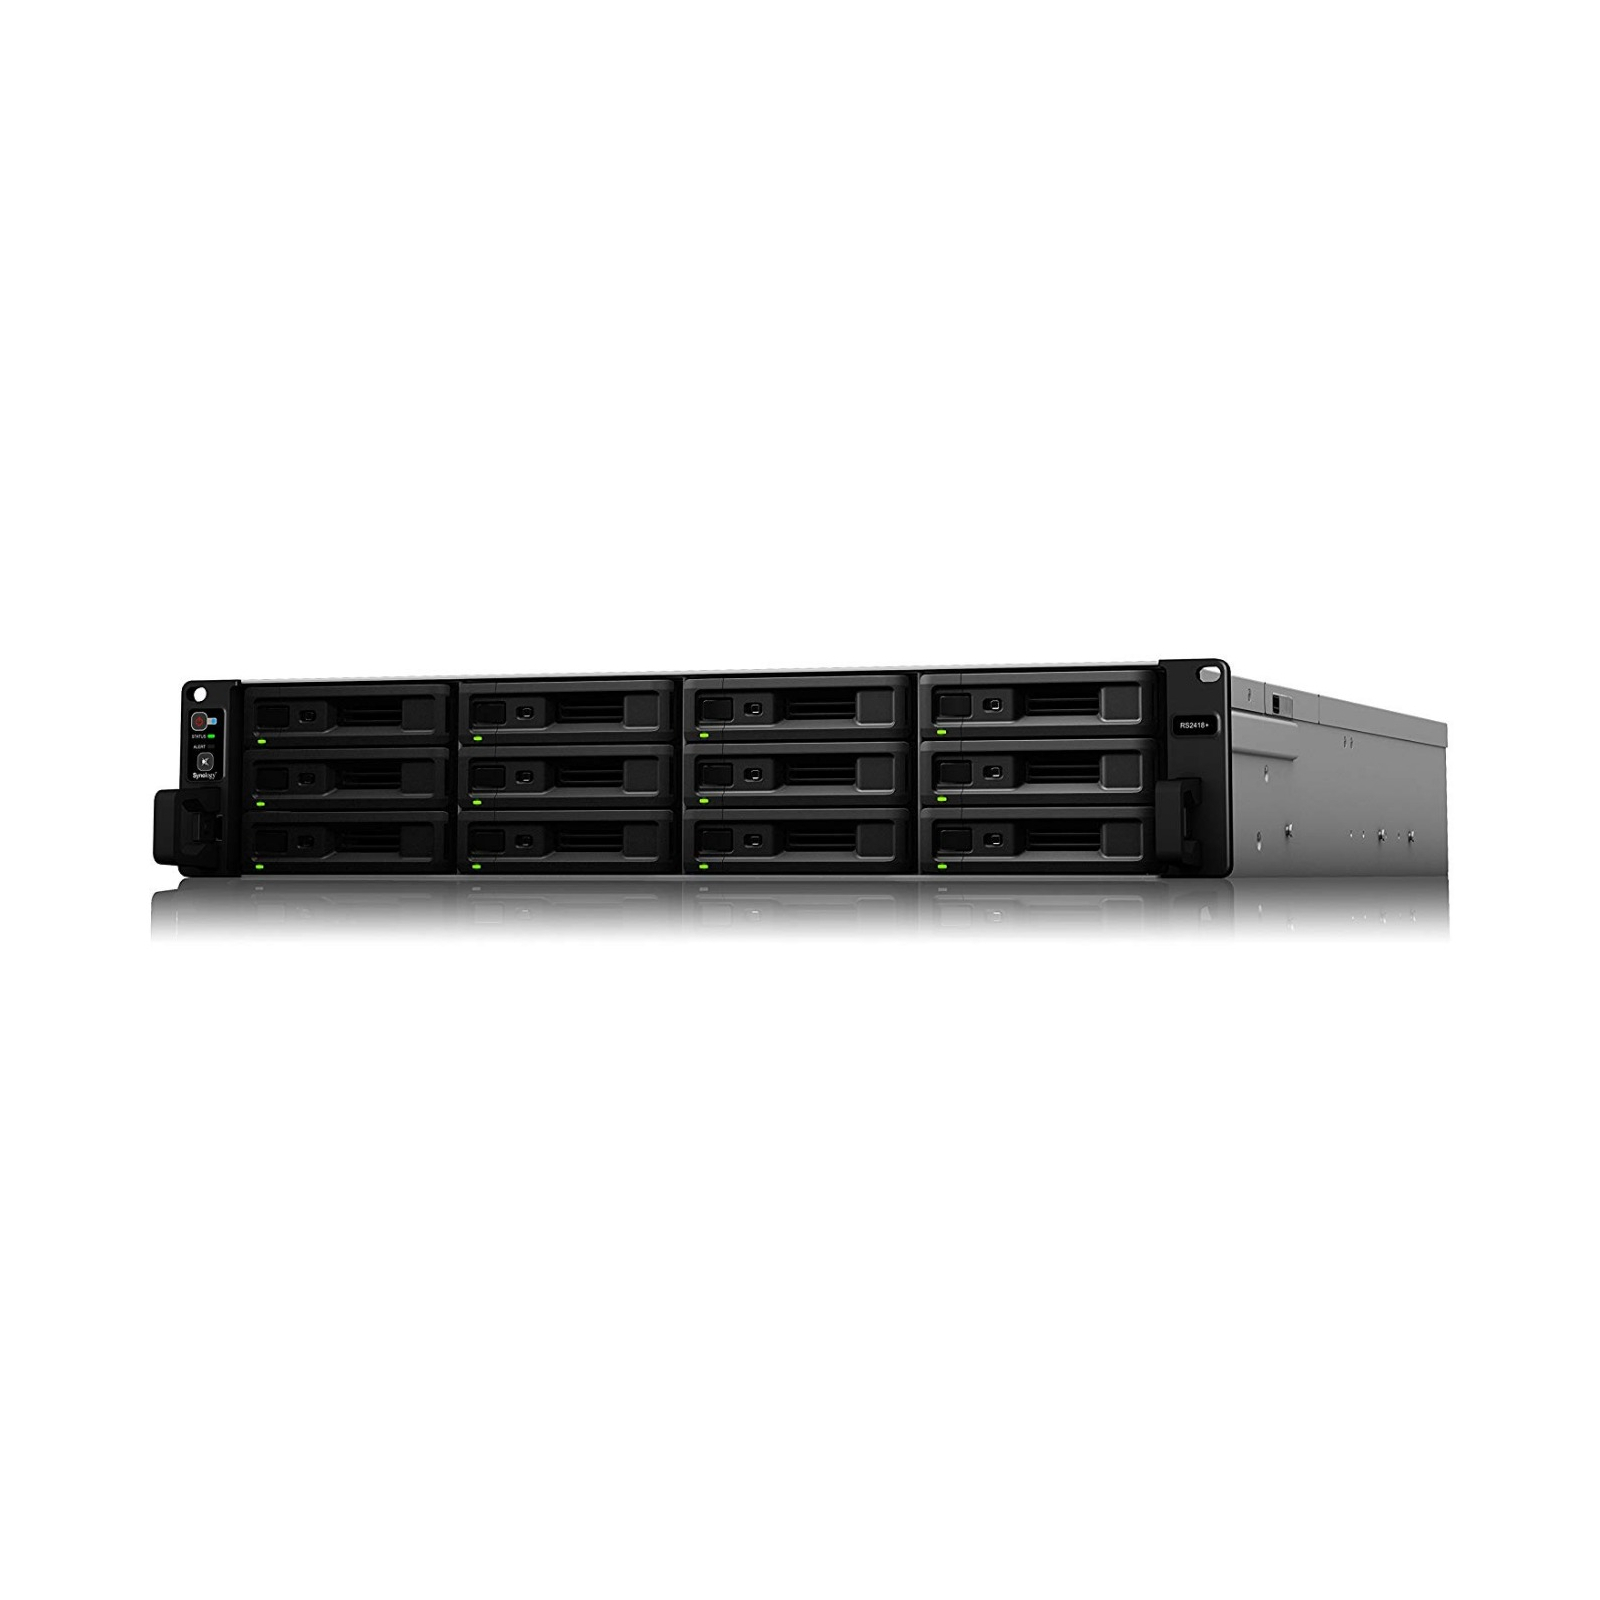 NAS Synology RS2418+